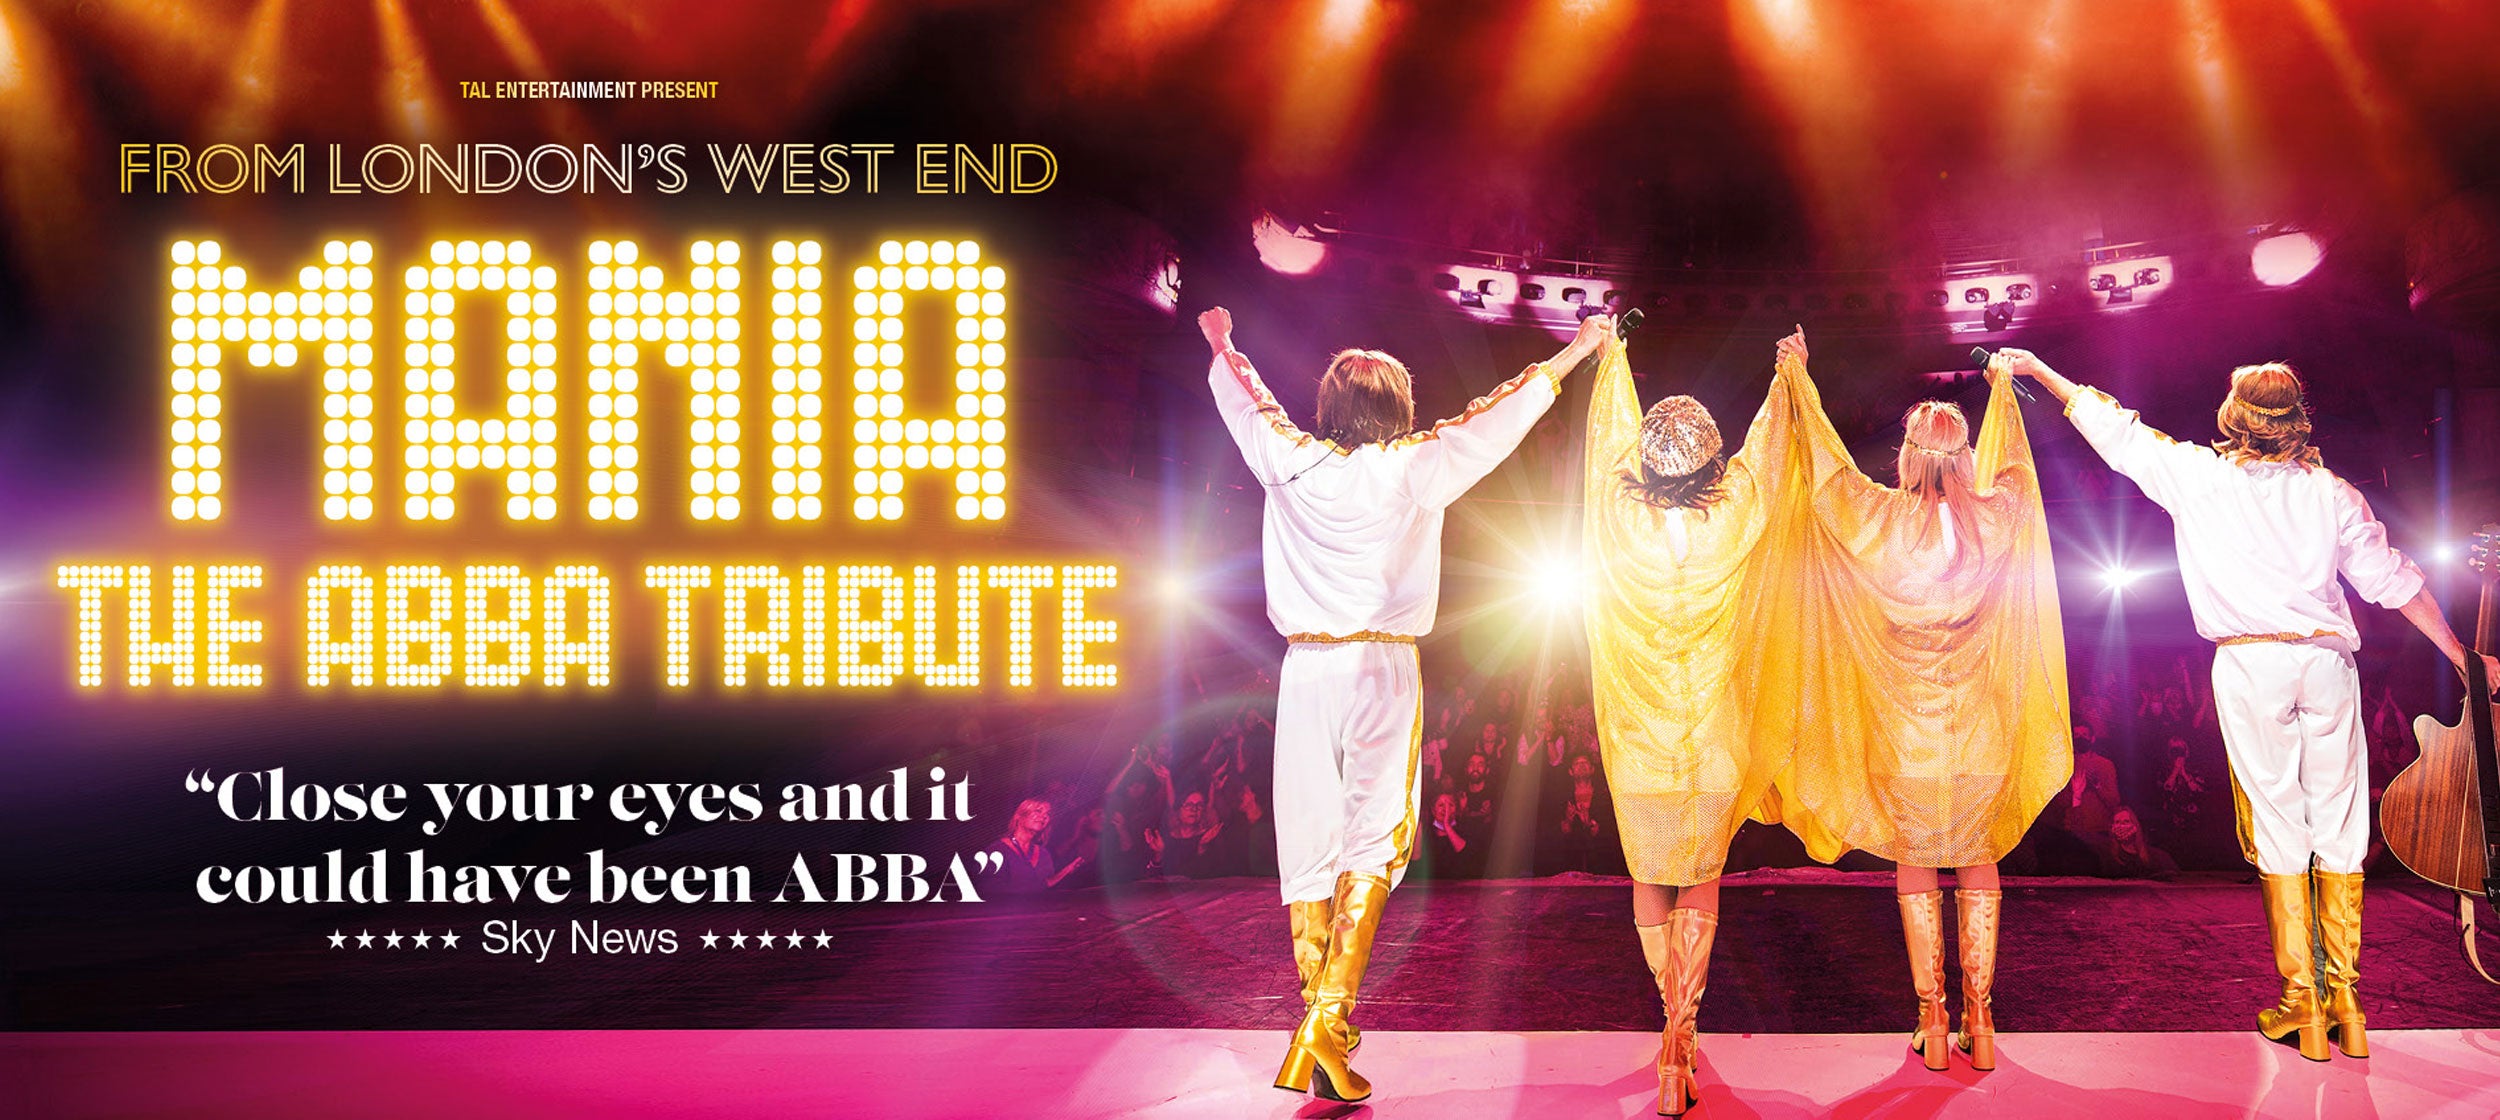 Mania: The ABBA Tribute comes to New Orleans!